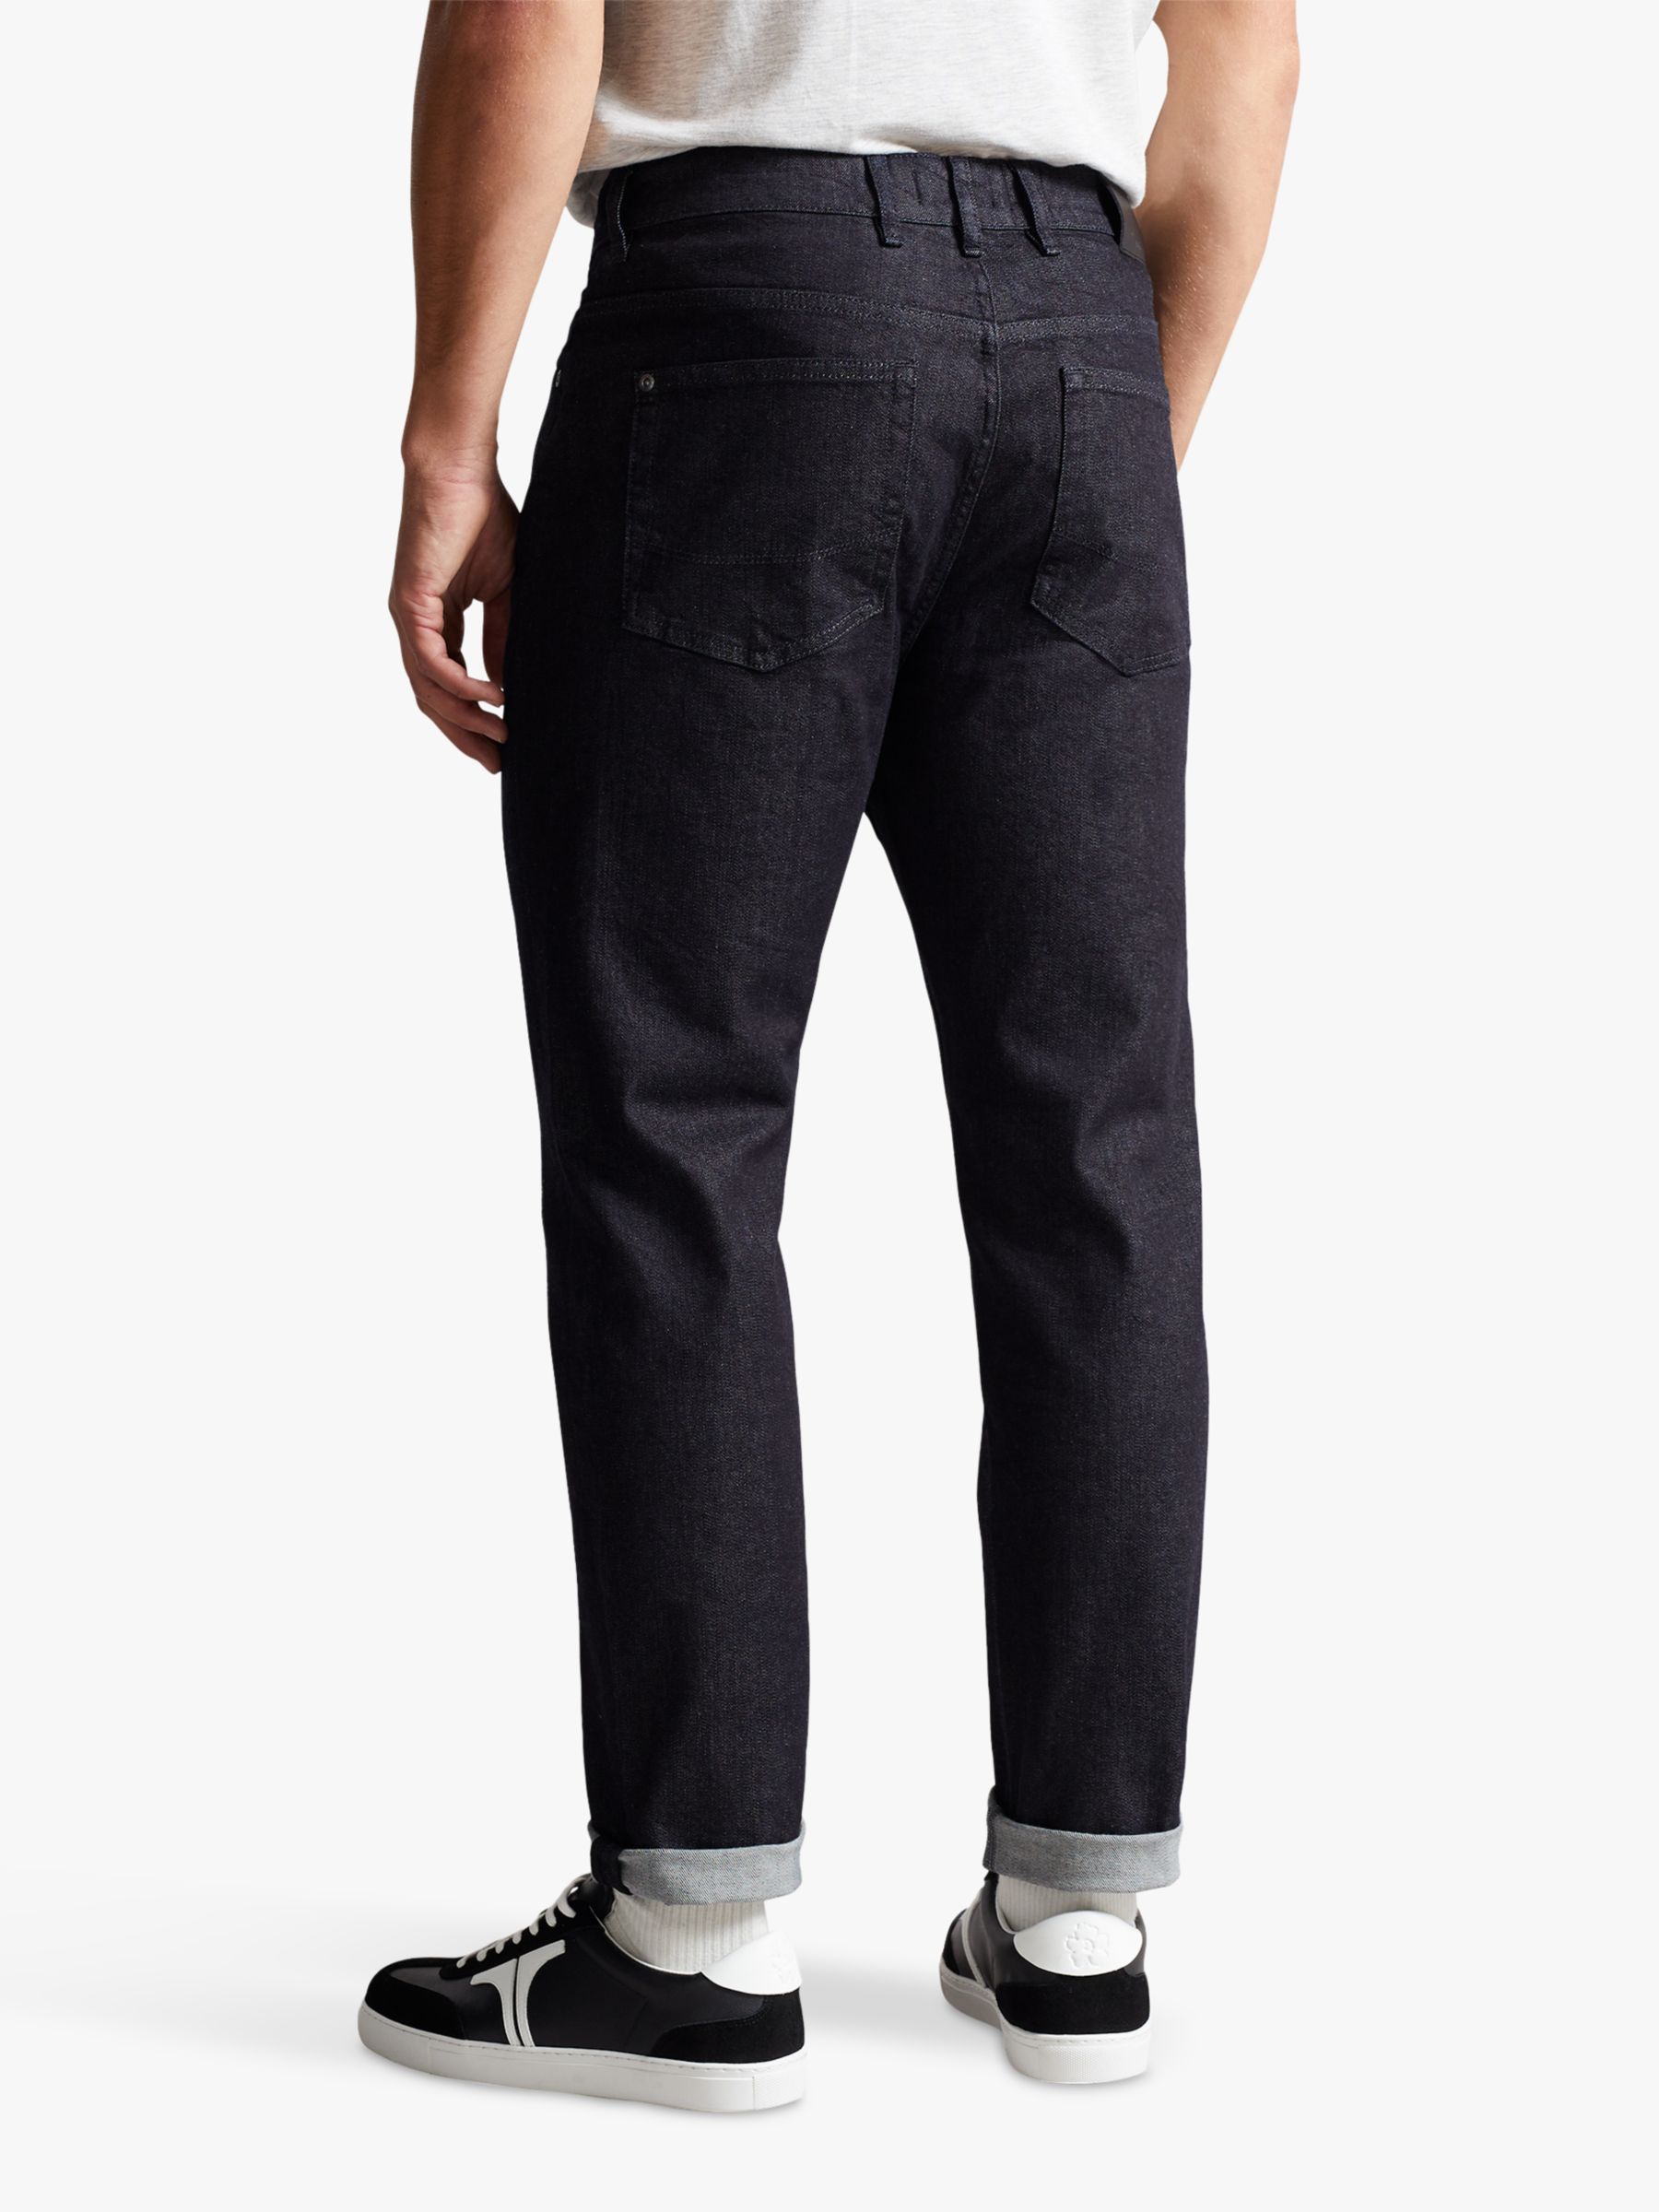 Ted Baker Finchly Slim Jeans, Navy Blue at John Lewis & Partners